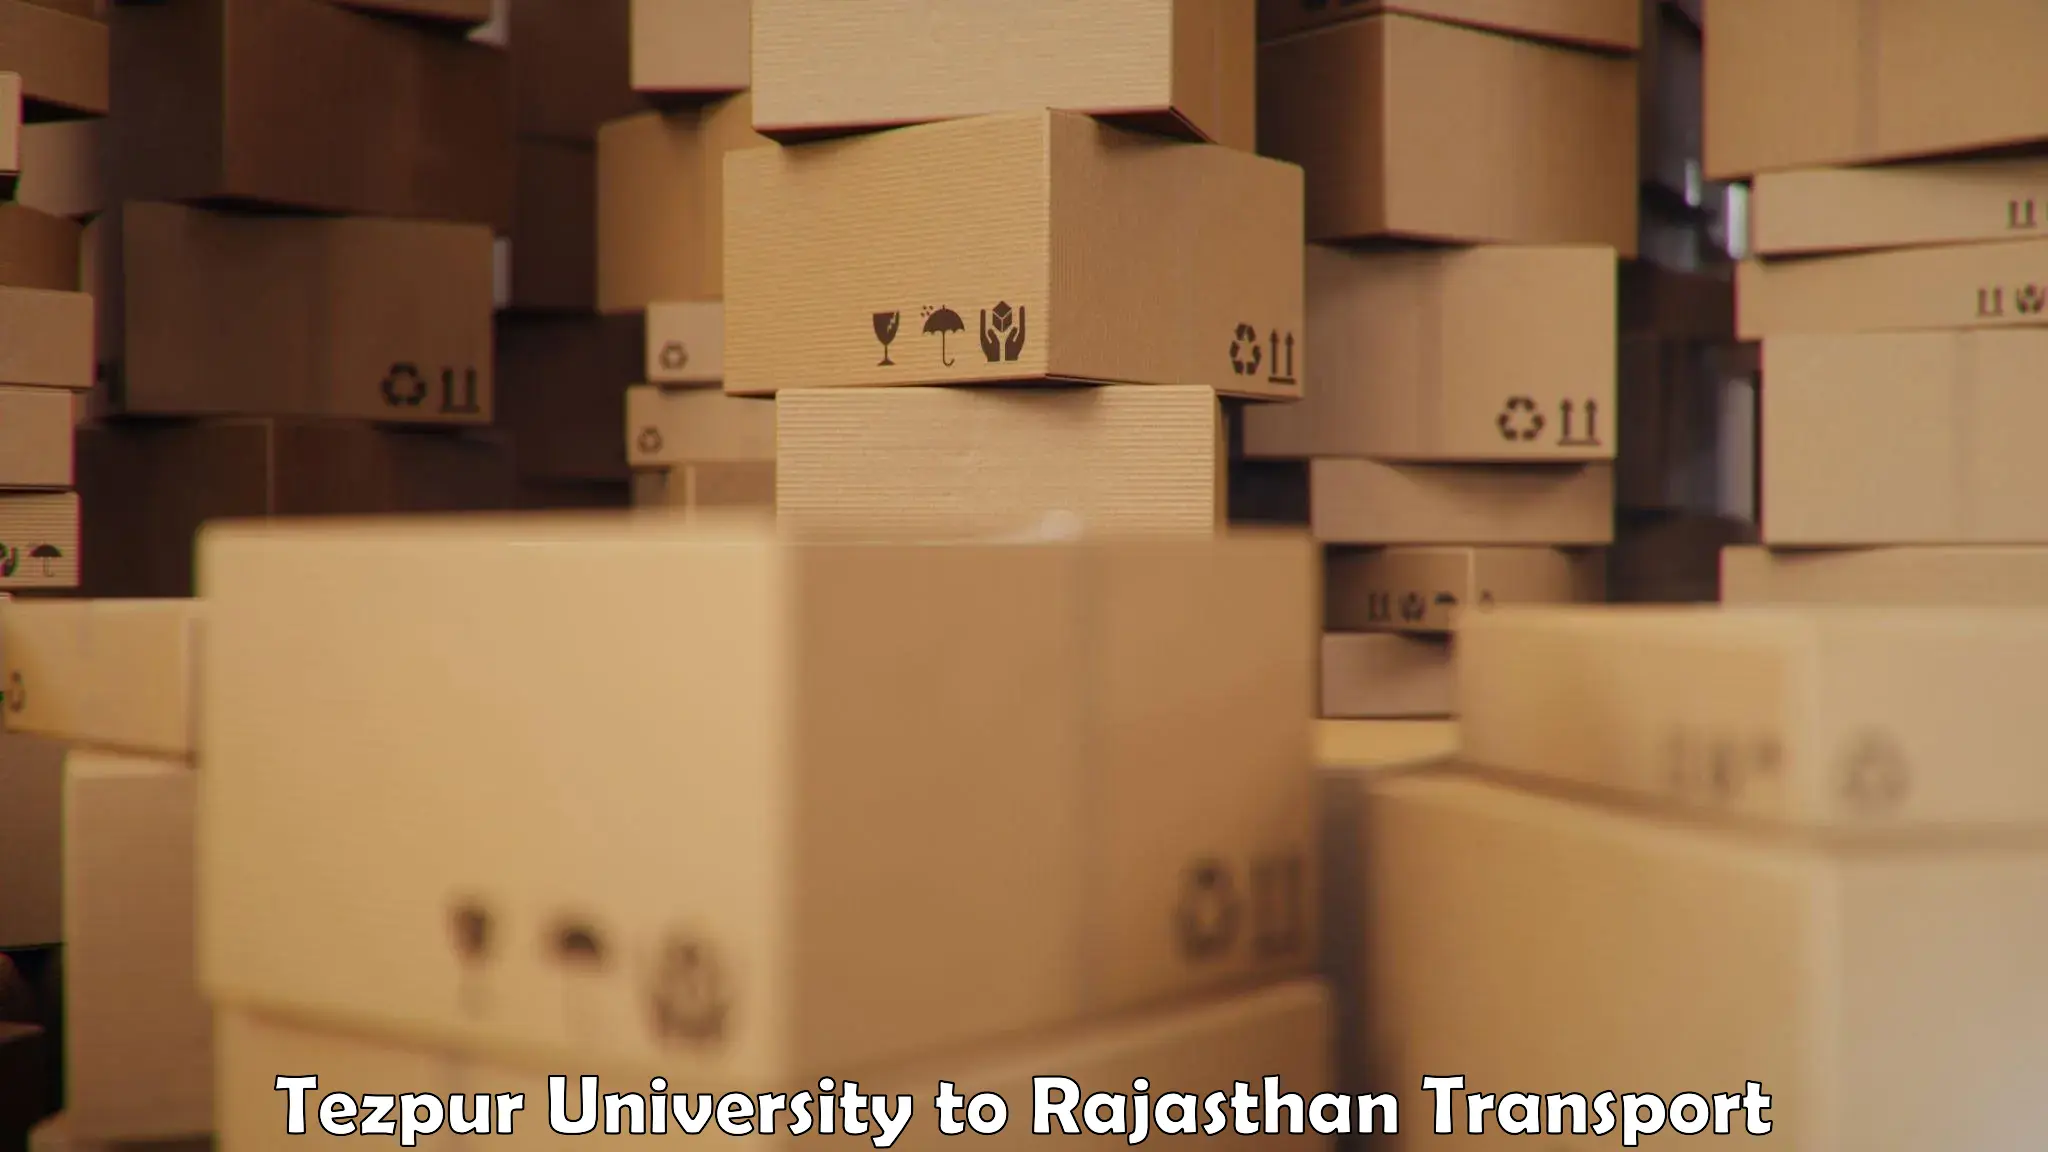 Goods delivery service Tezpur University to Renwal